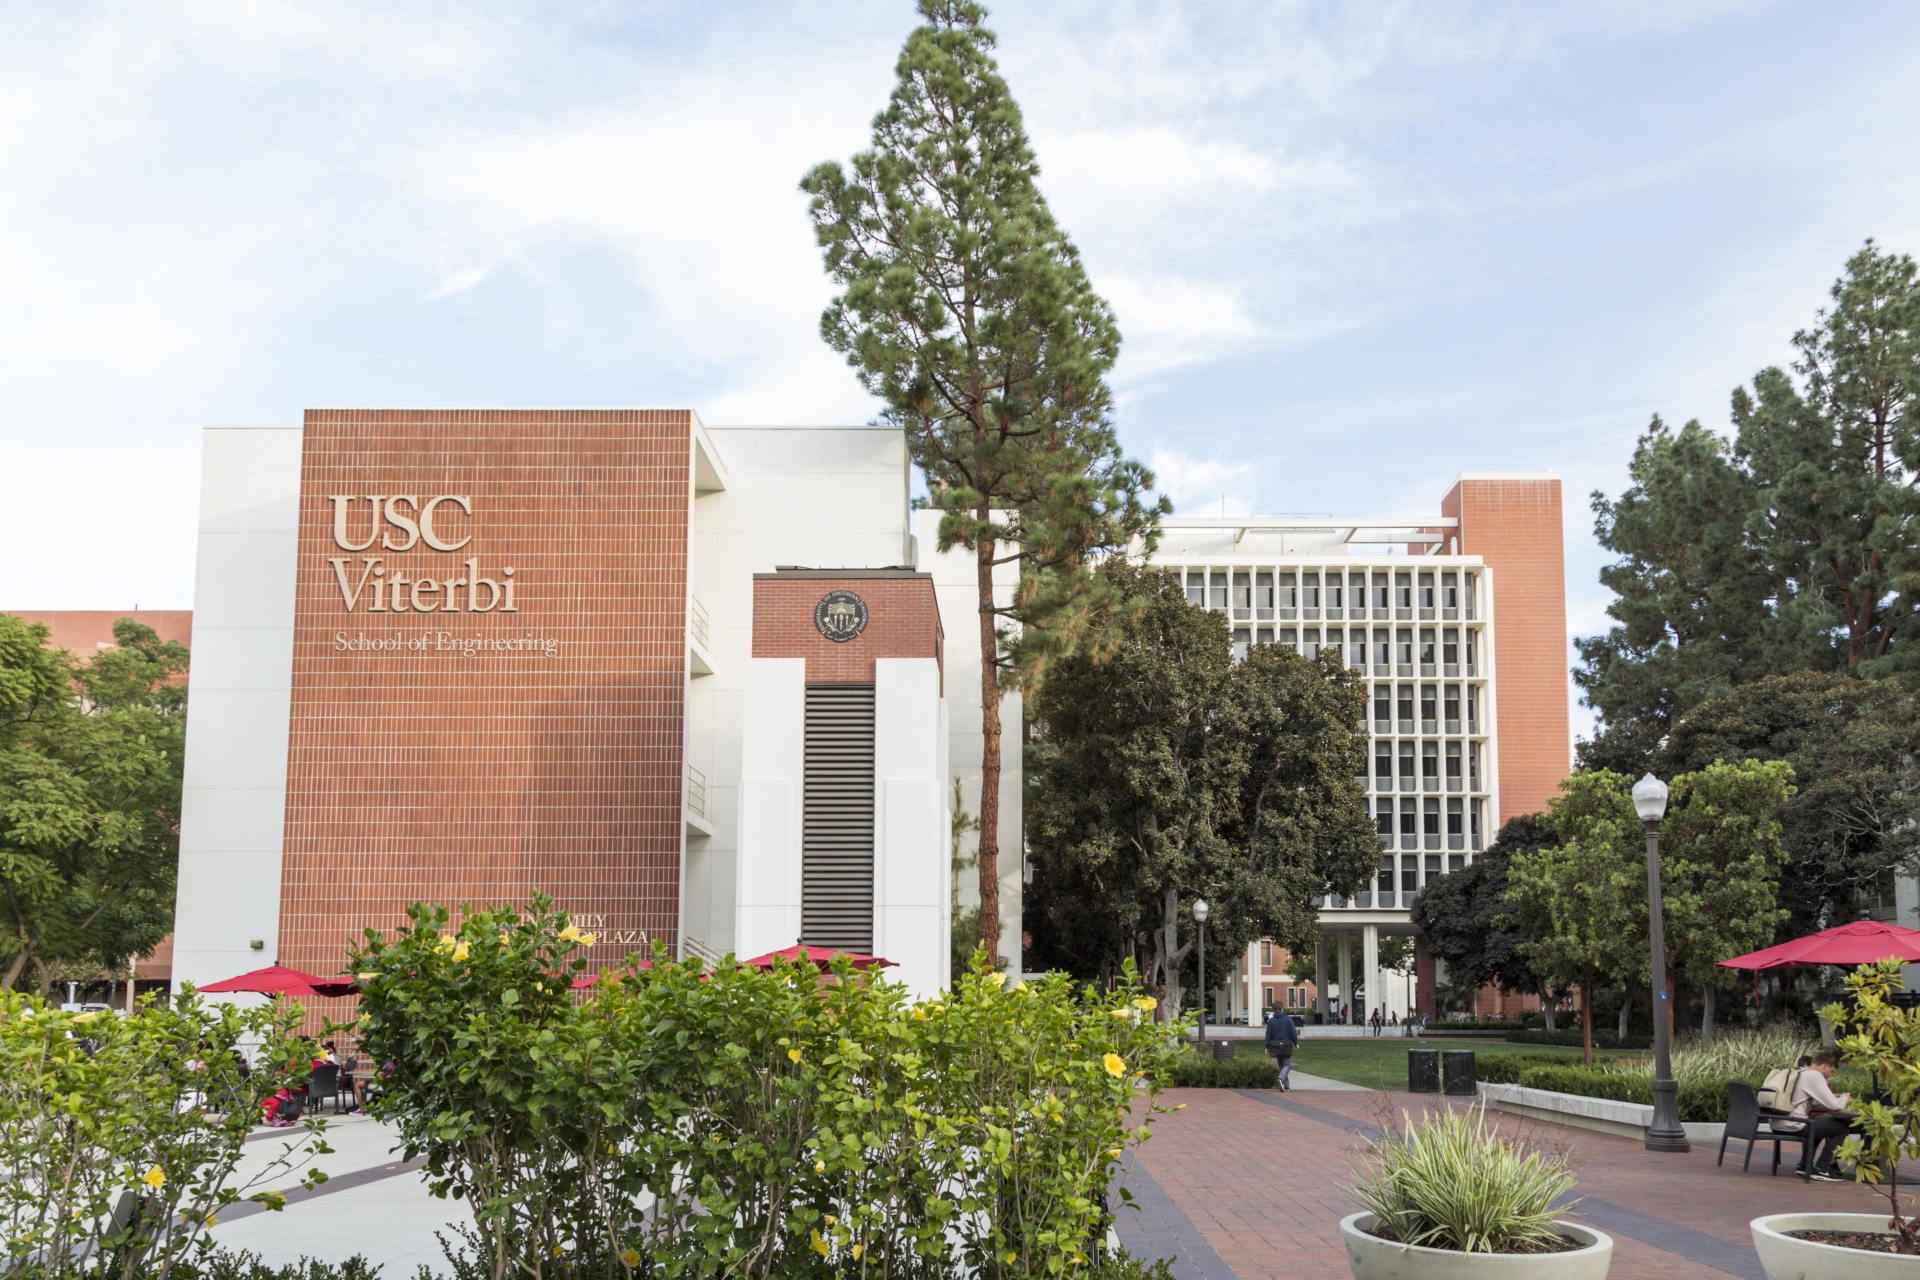 Come for an Engineering Visit to USC this Summer